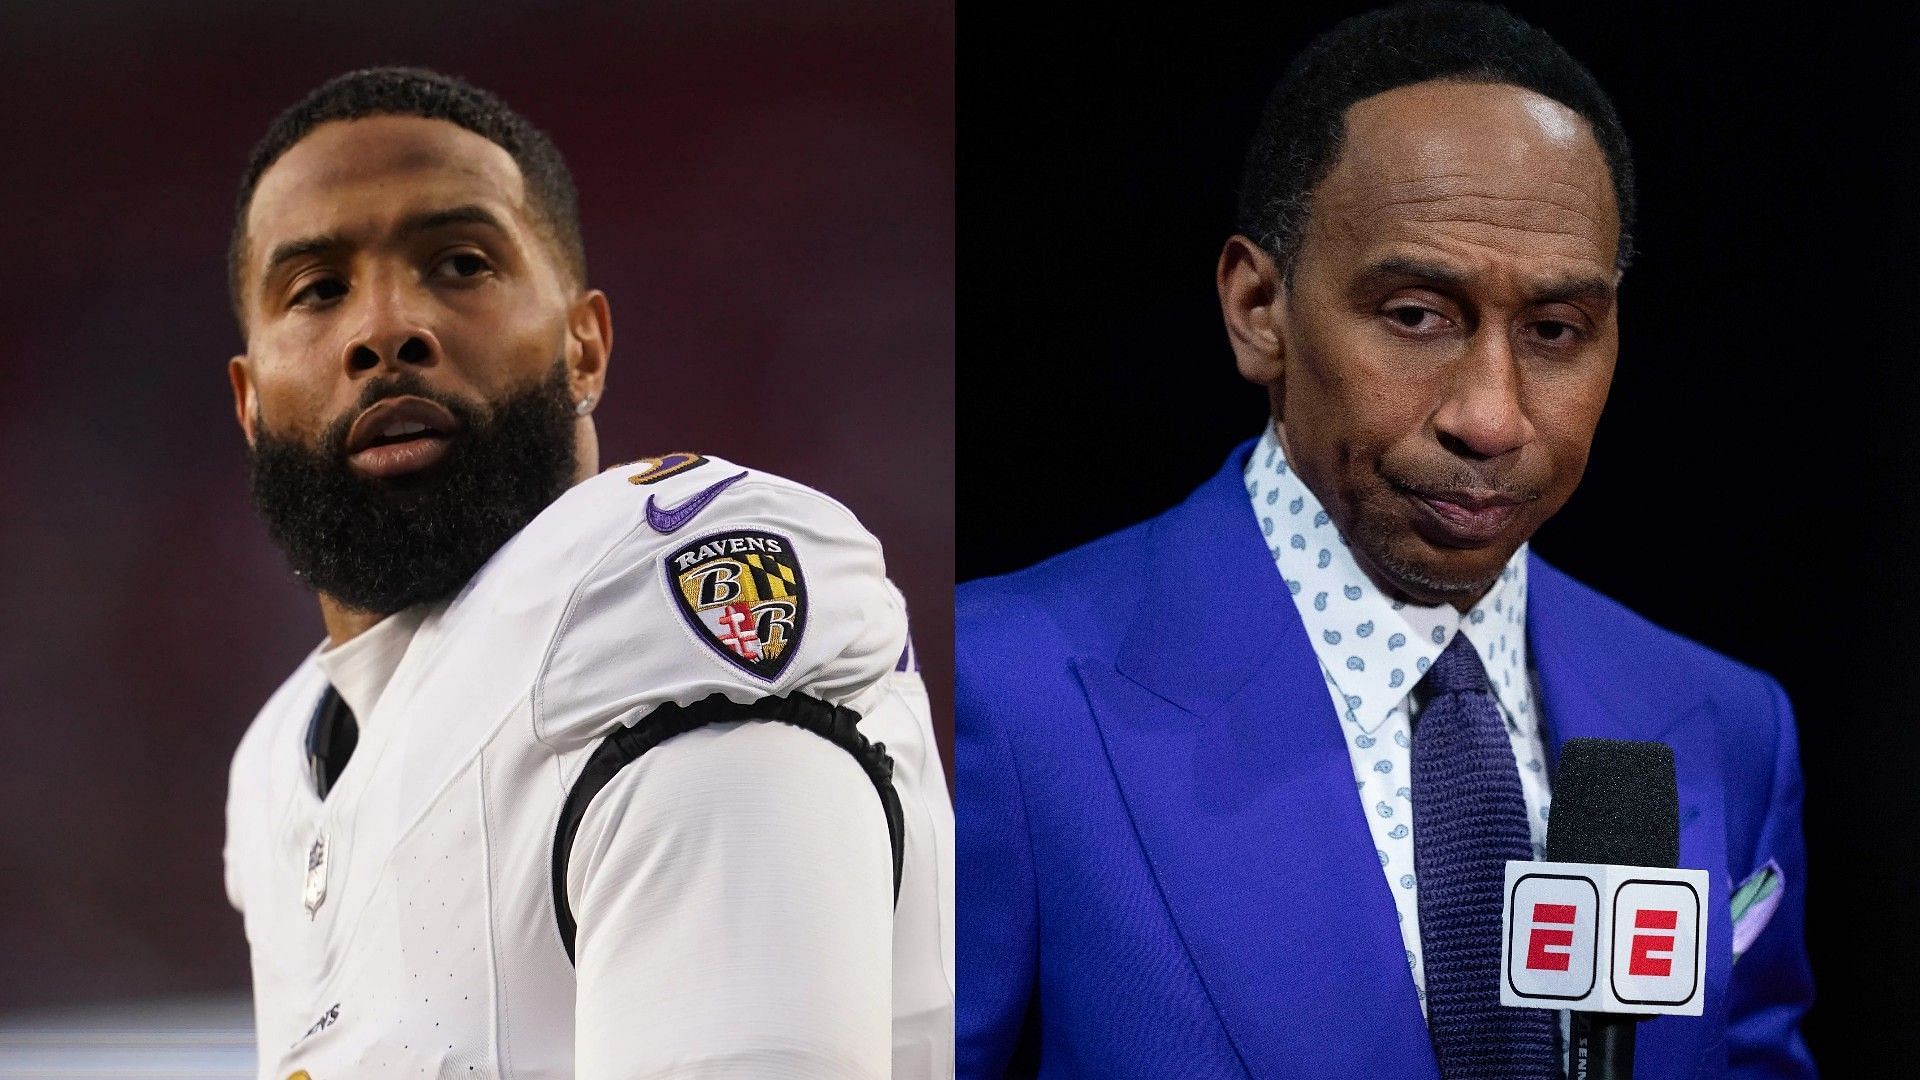 Stephen A. Smith questions Odell Beckham Jr.&rsquo;s future in the NFL following blink deal with Dolphins